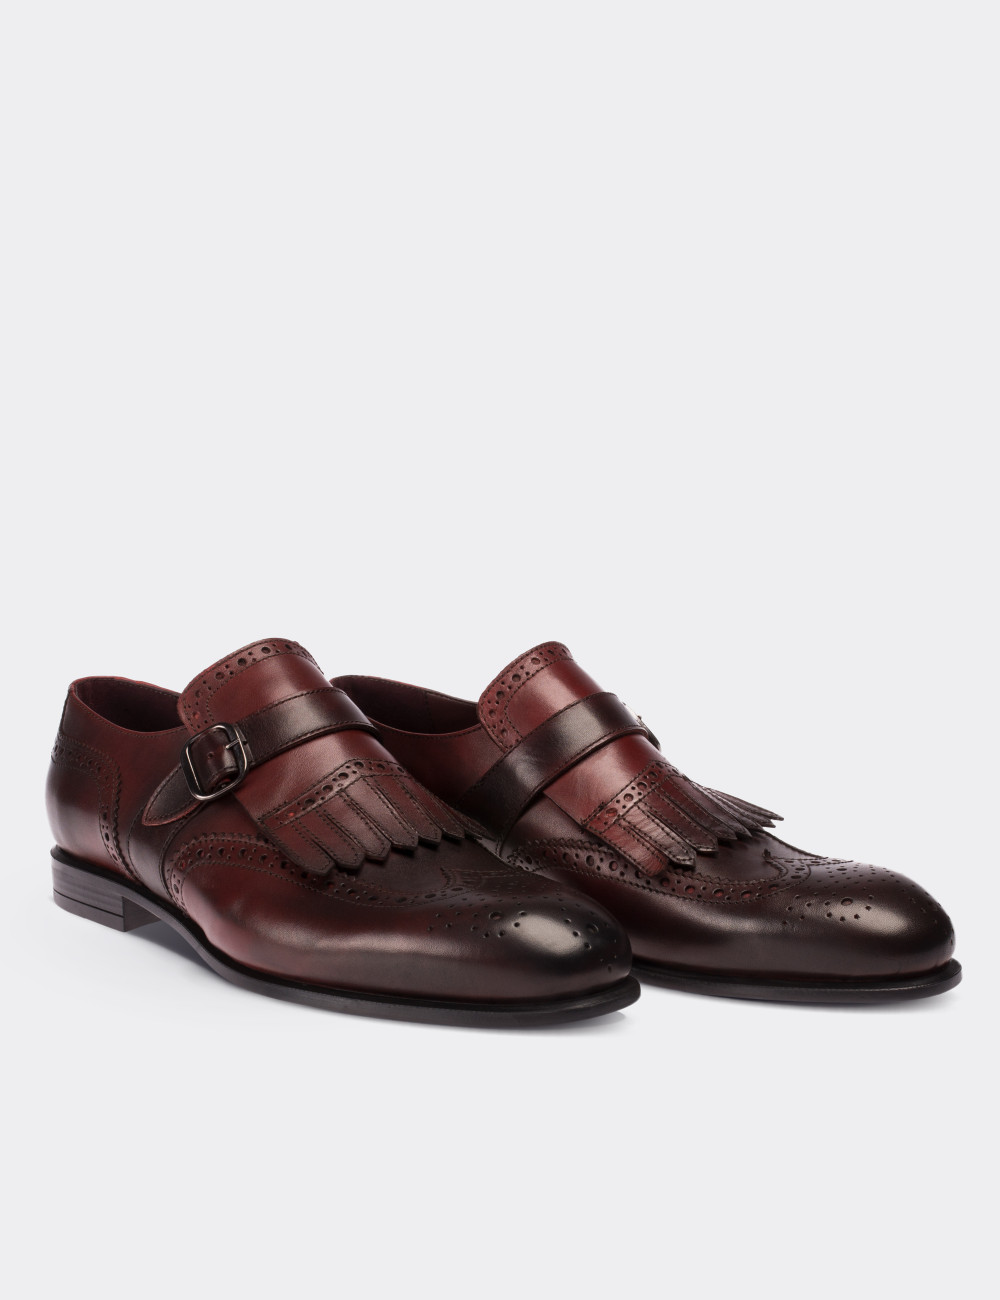 Burgundy Leather Monk Straps Shoes 01680MBRDC01 - Deery